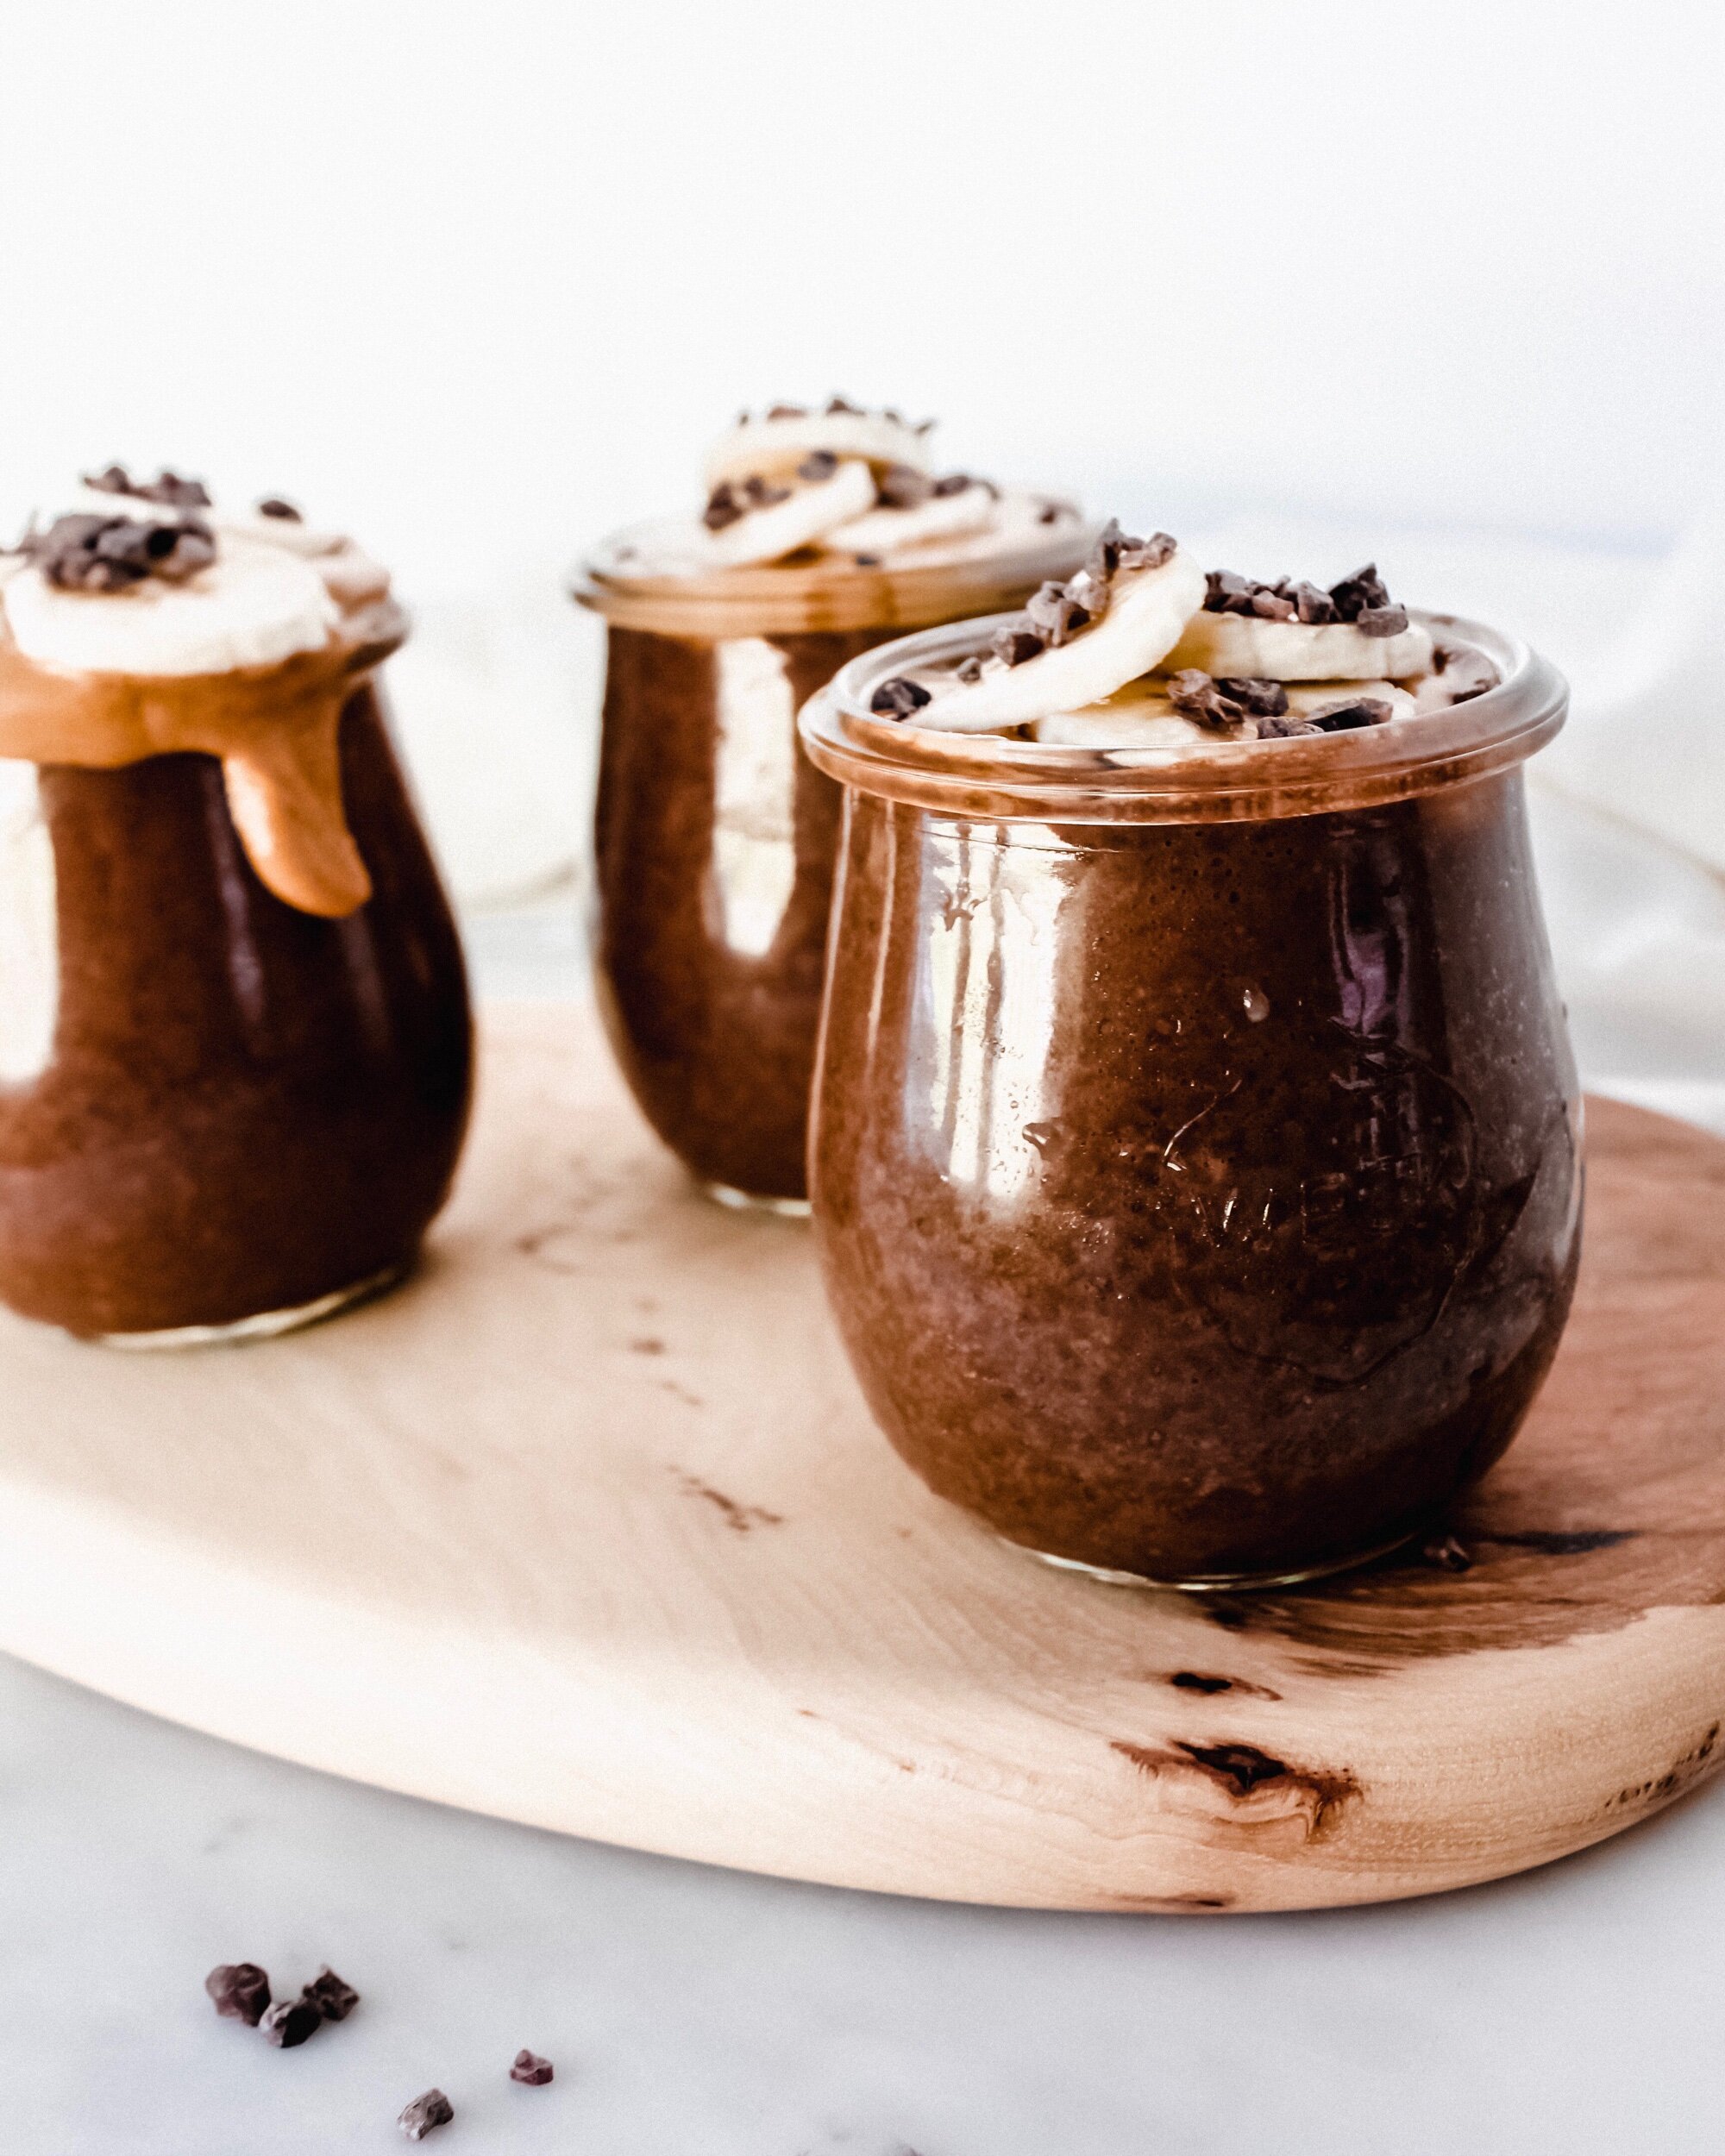 Chocolate Nut Butter Chia Seed Pudding — Busy Girl Baking